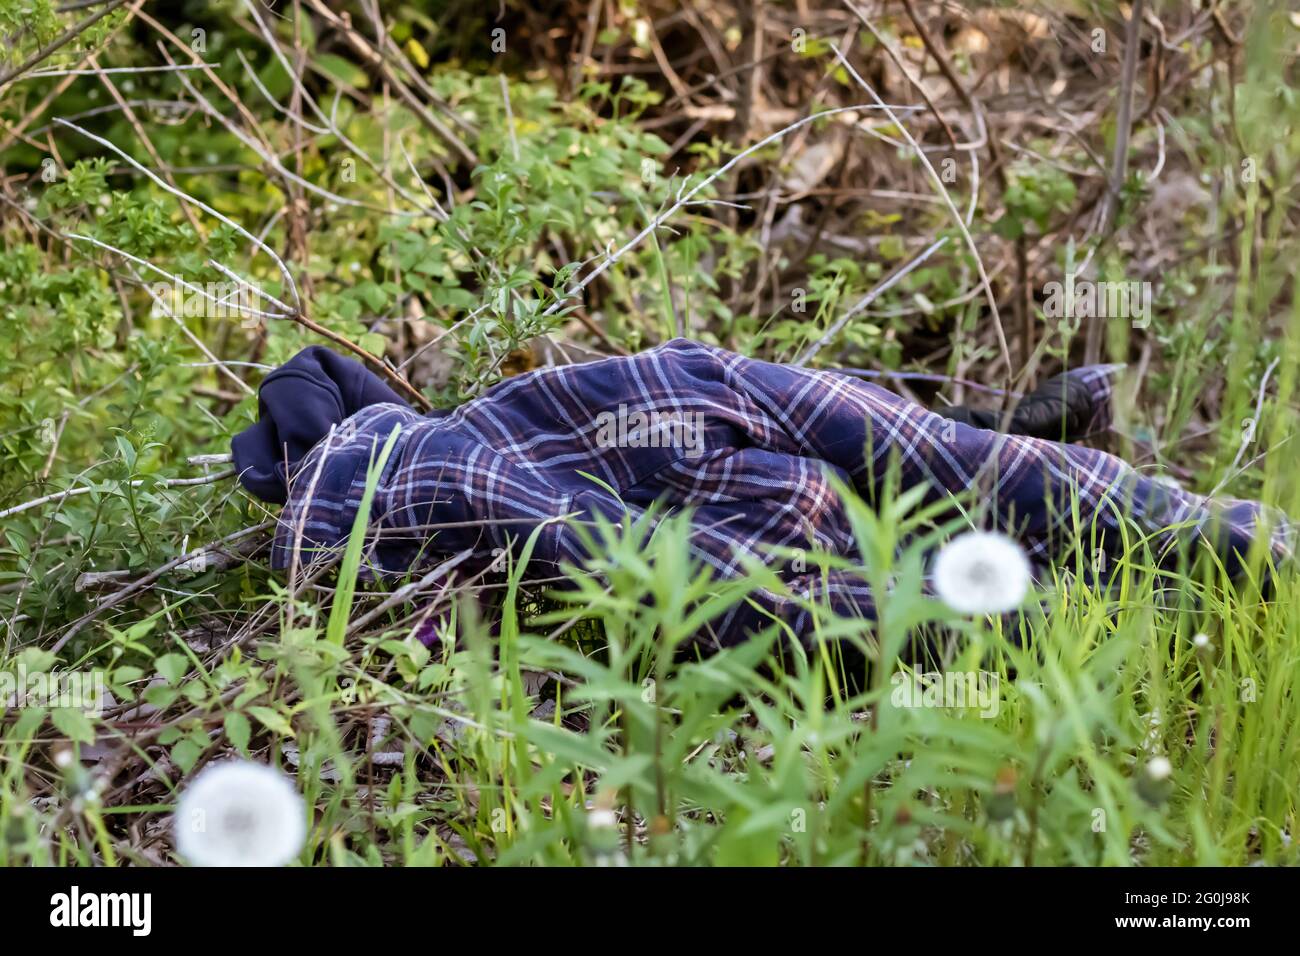 Discarded hooded blue plaid checked jacket in the woods. Looks like a dead body. Stock Photo